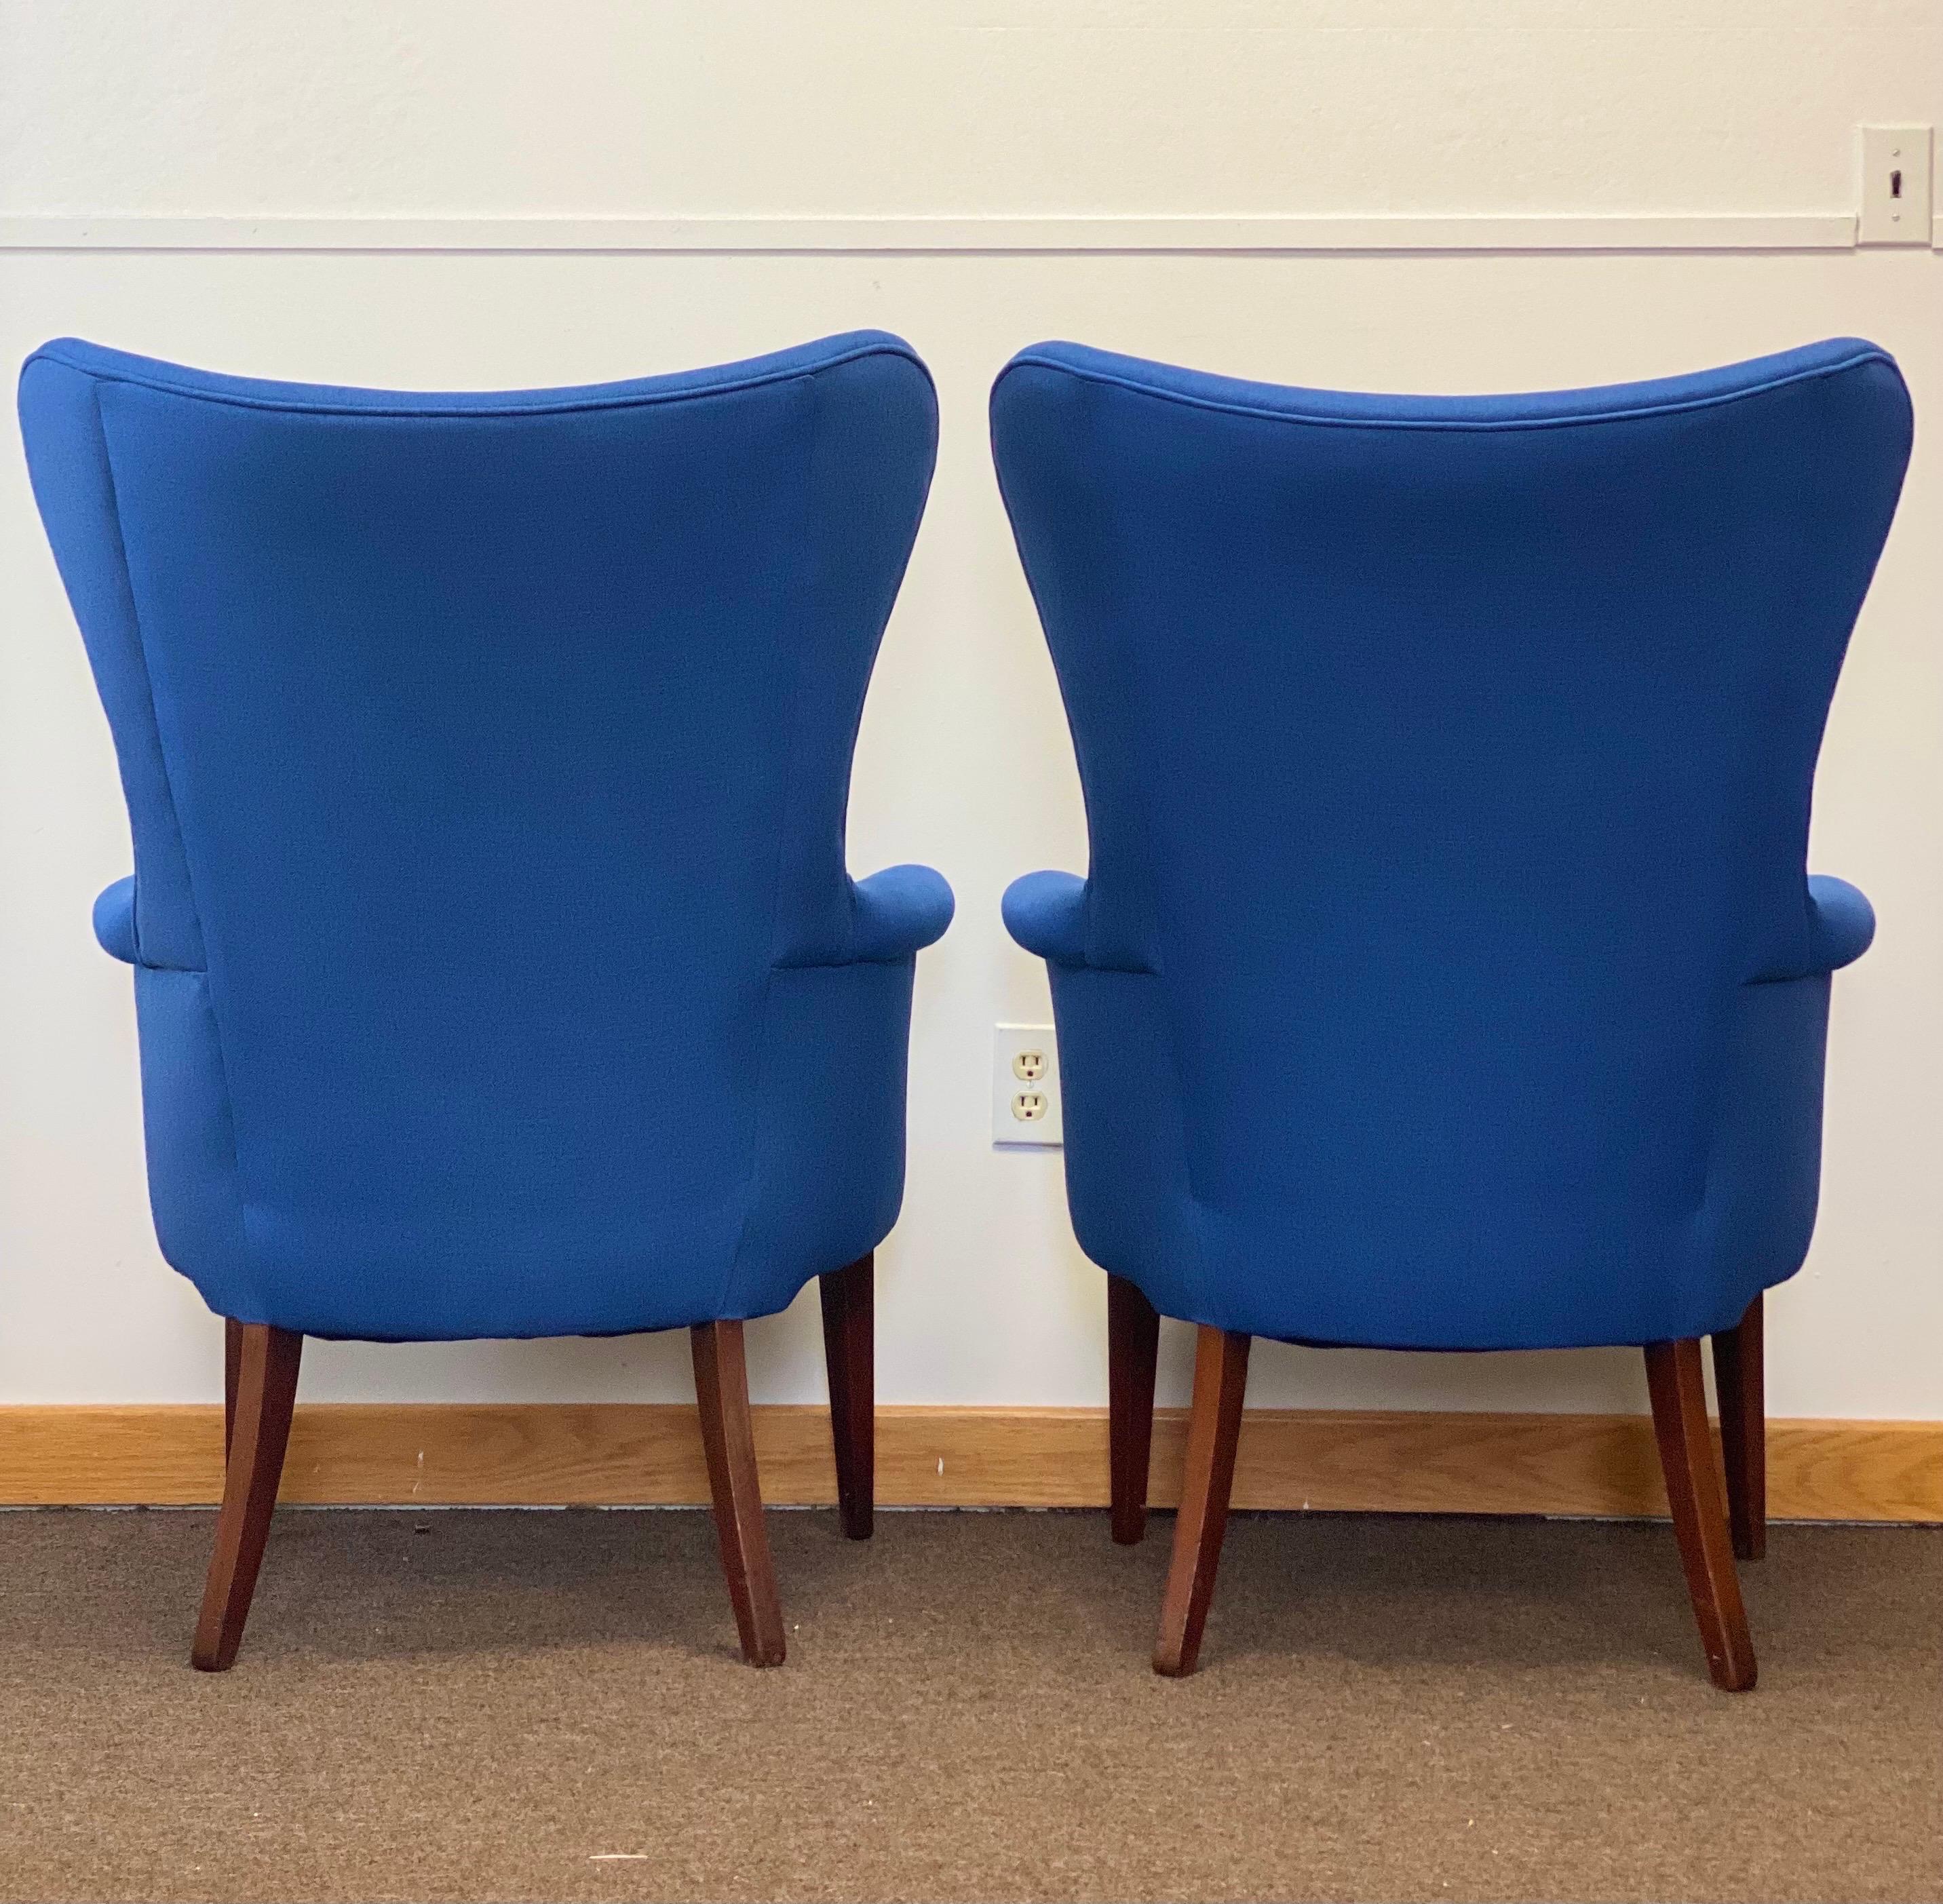 North American 1950s Mid-Century Modern Butterfly Royal Blue Wingback Chairs, a Pair